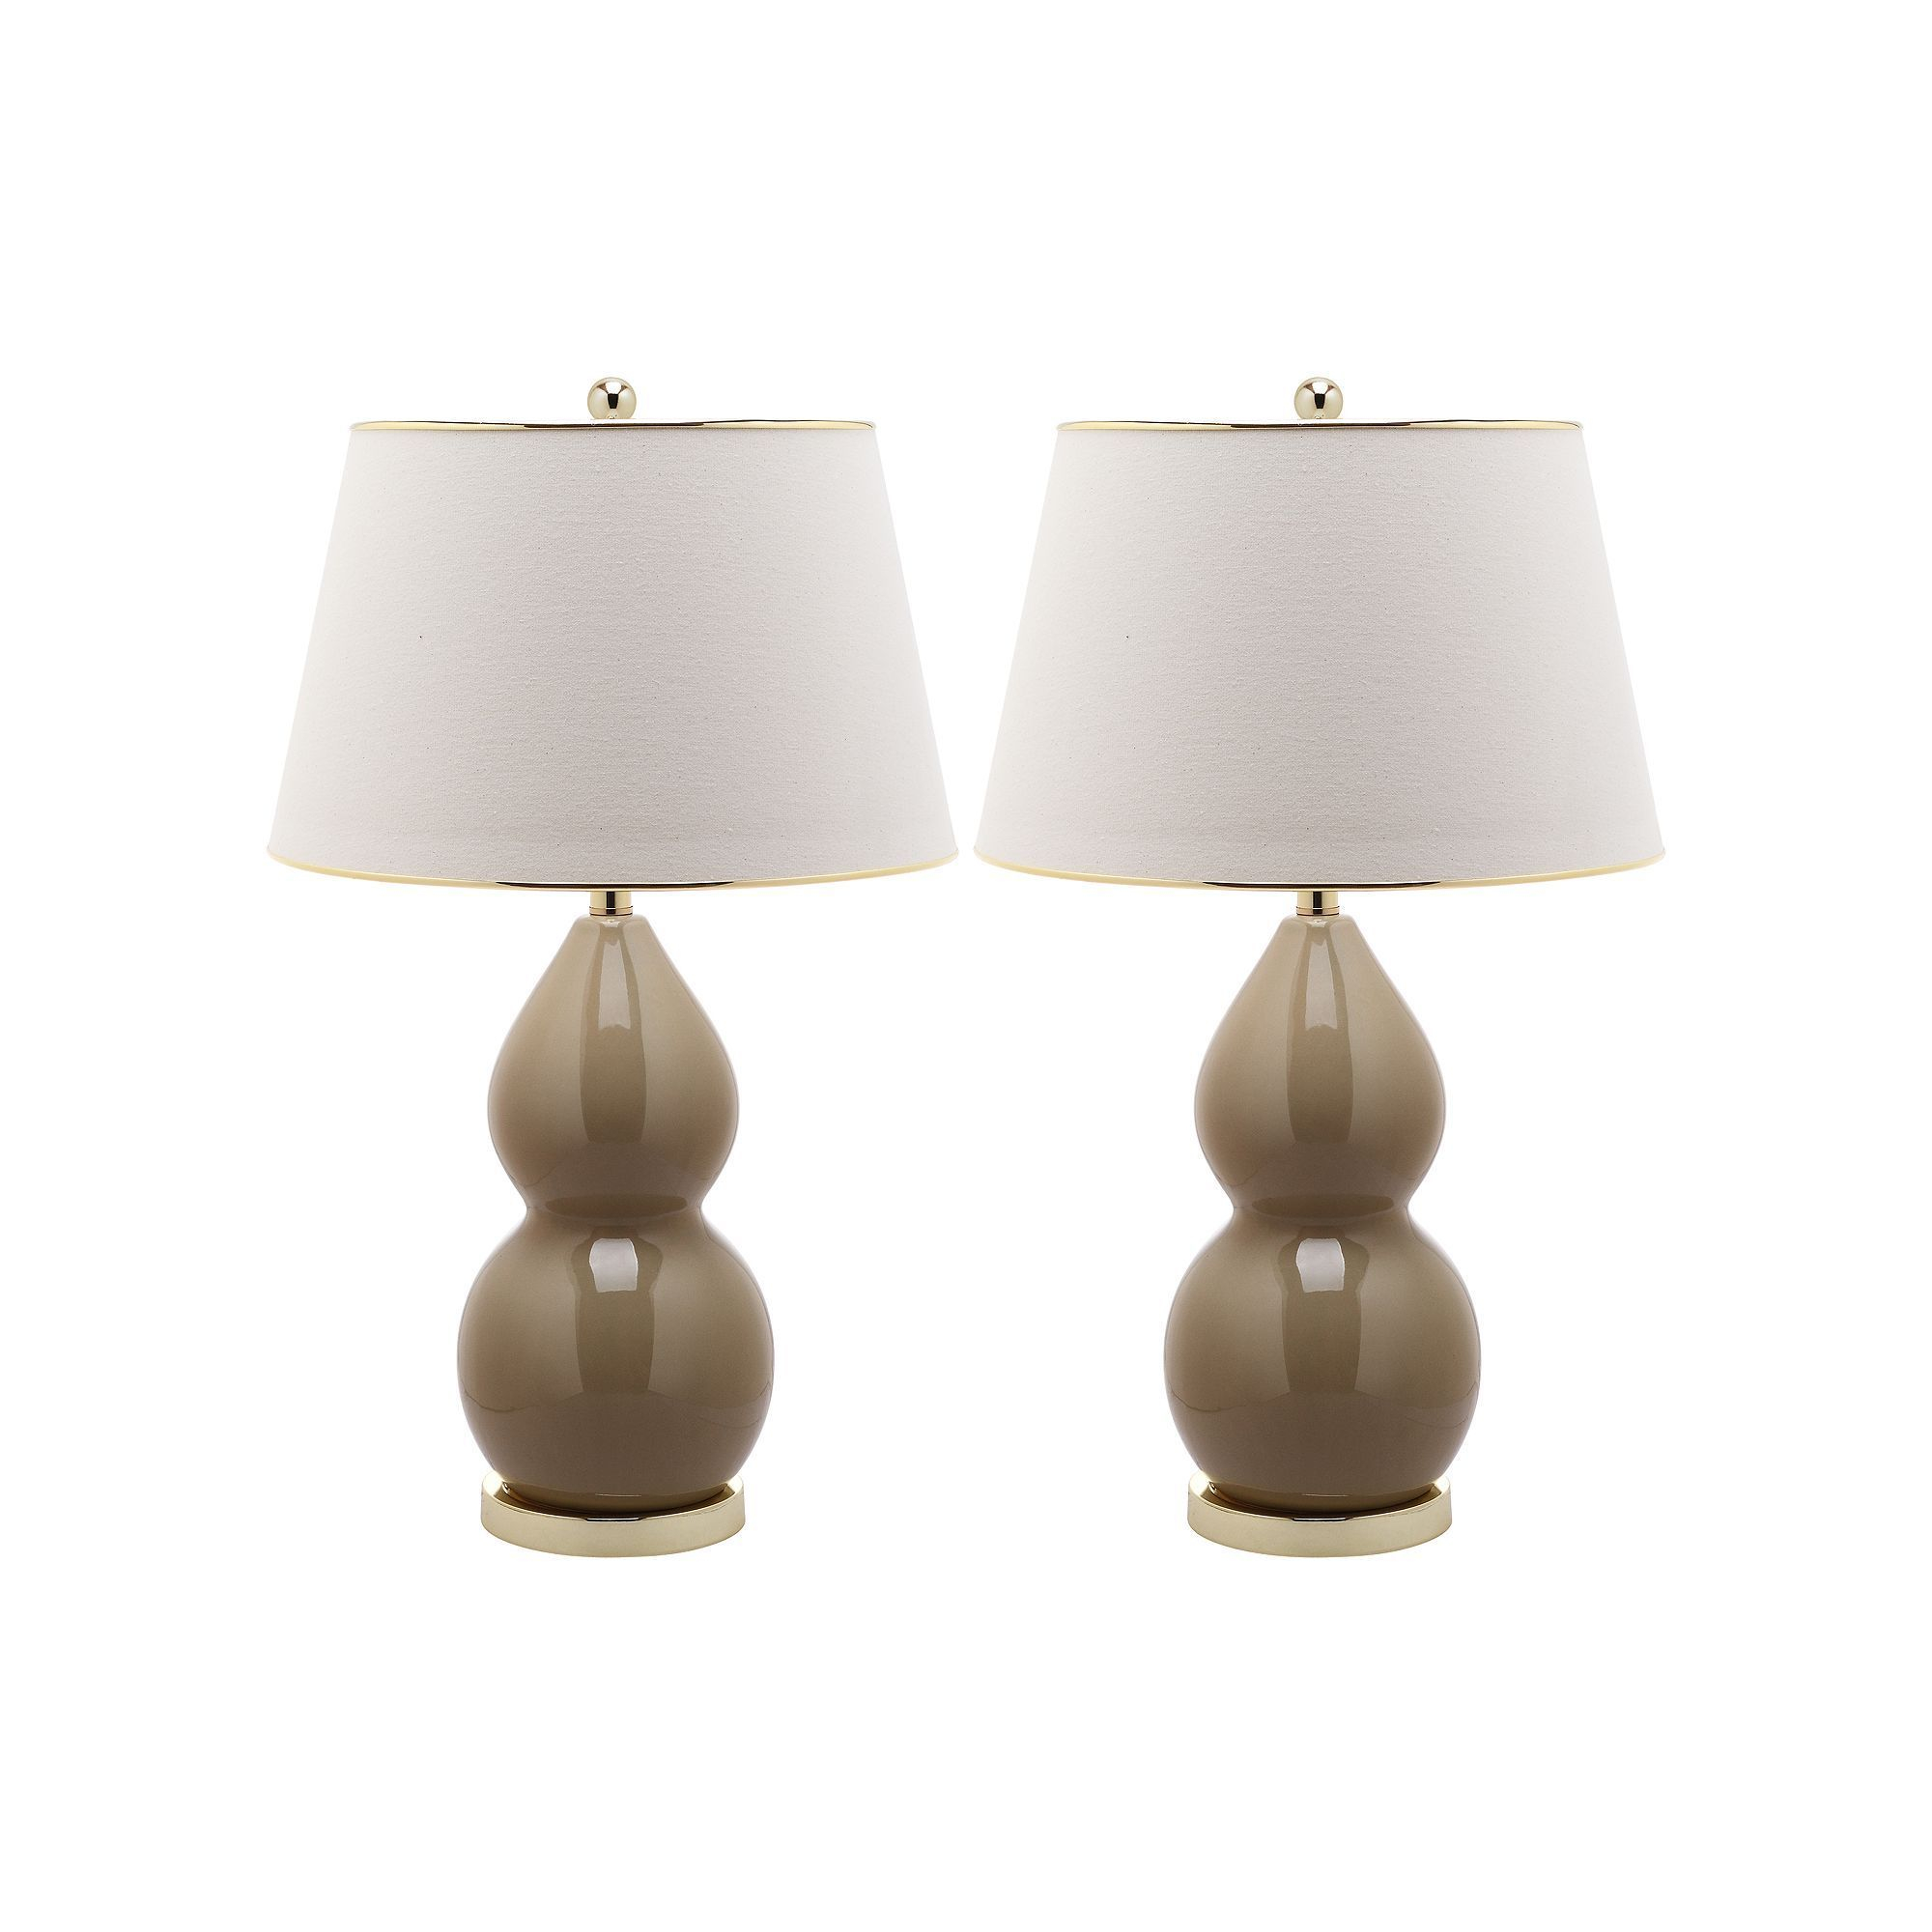 Lighting Fancy Kohls Lamps With Macys Lamps And Girls Room within size 2000 X 2000